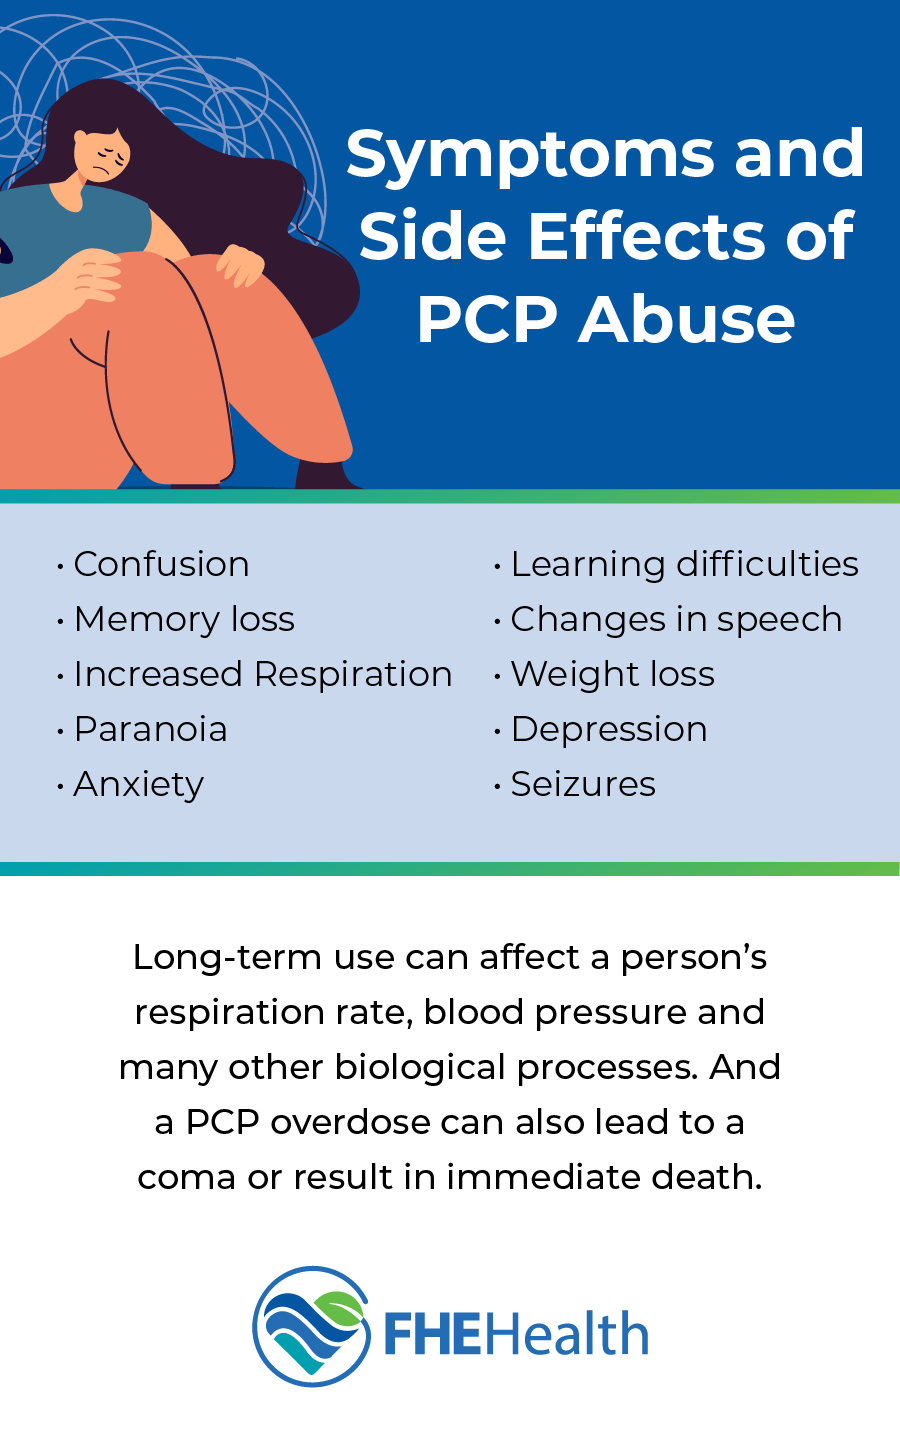 Symptoms and Side Effects of PCP Abuse